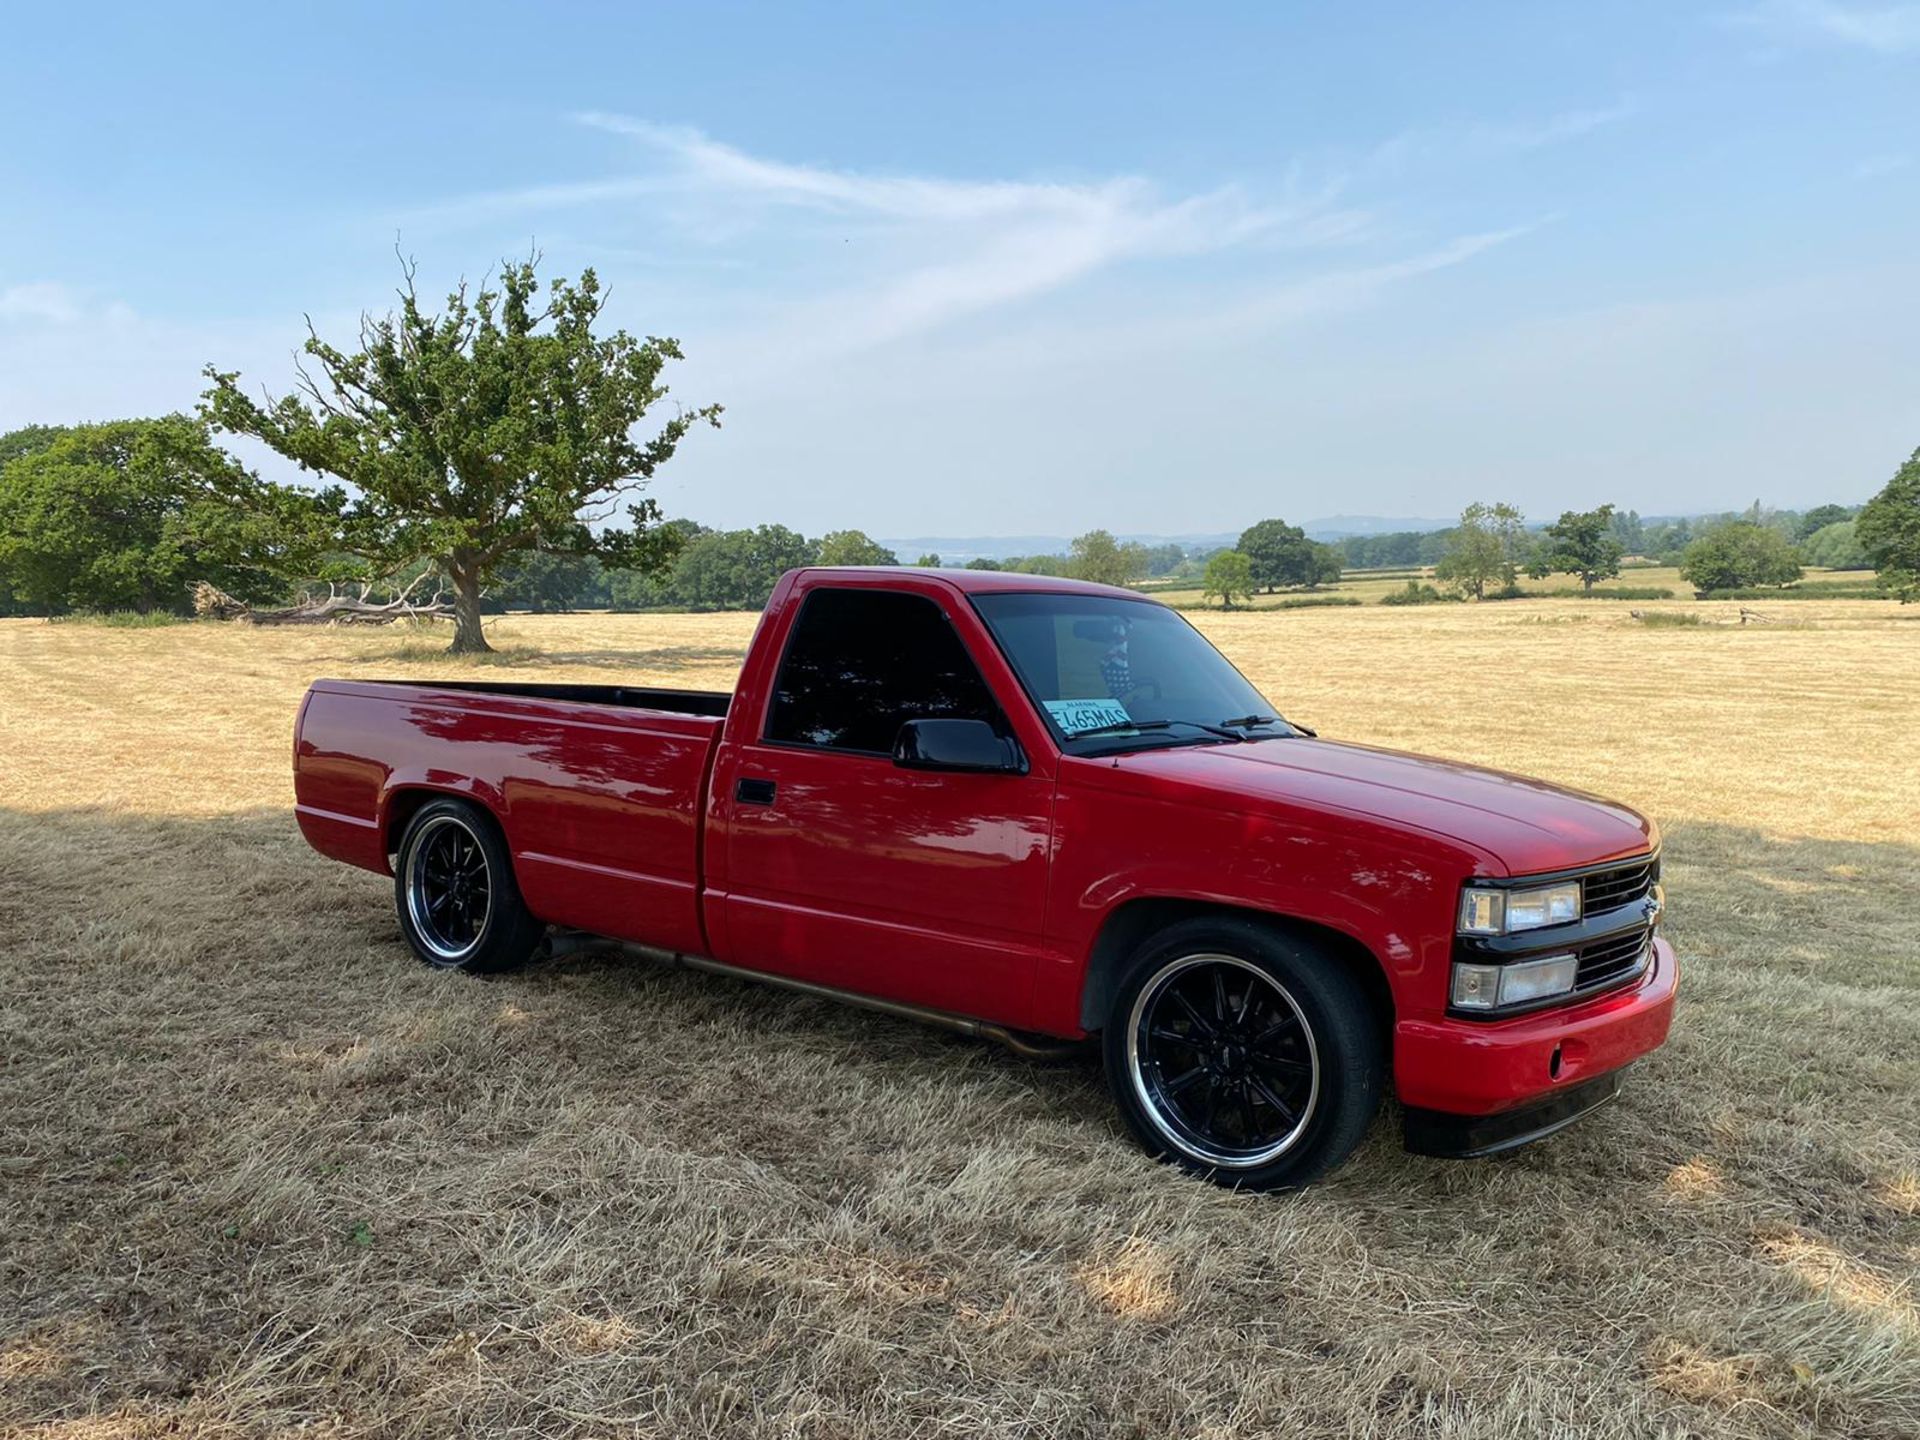 Super Red 1988 Chevrolet C1500 / OBS / GMT-400 - Single cab long bed (8ft) - Image 11 of 15